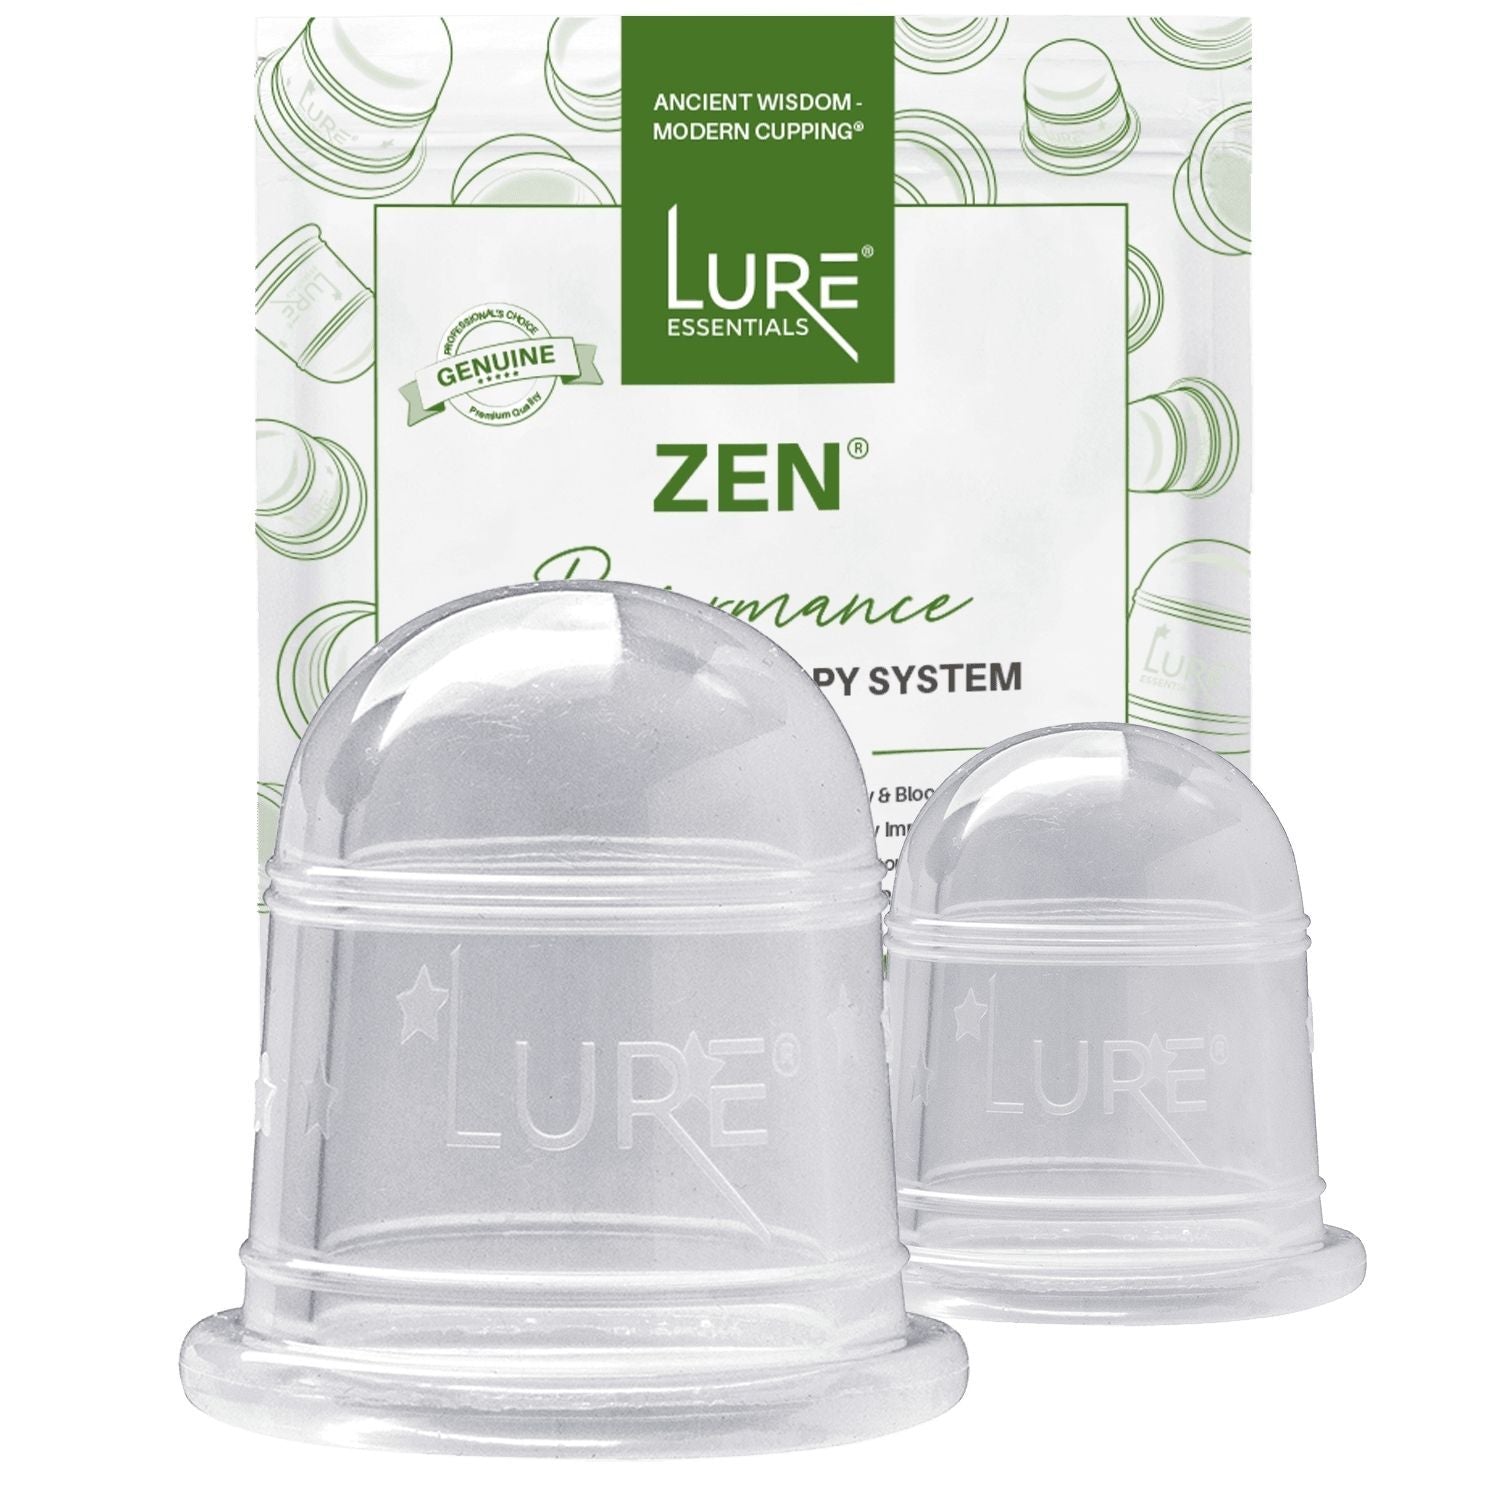 ZEN Body Cupping Set 1 Small 1 Large Cups